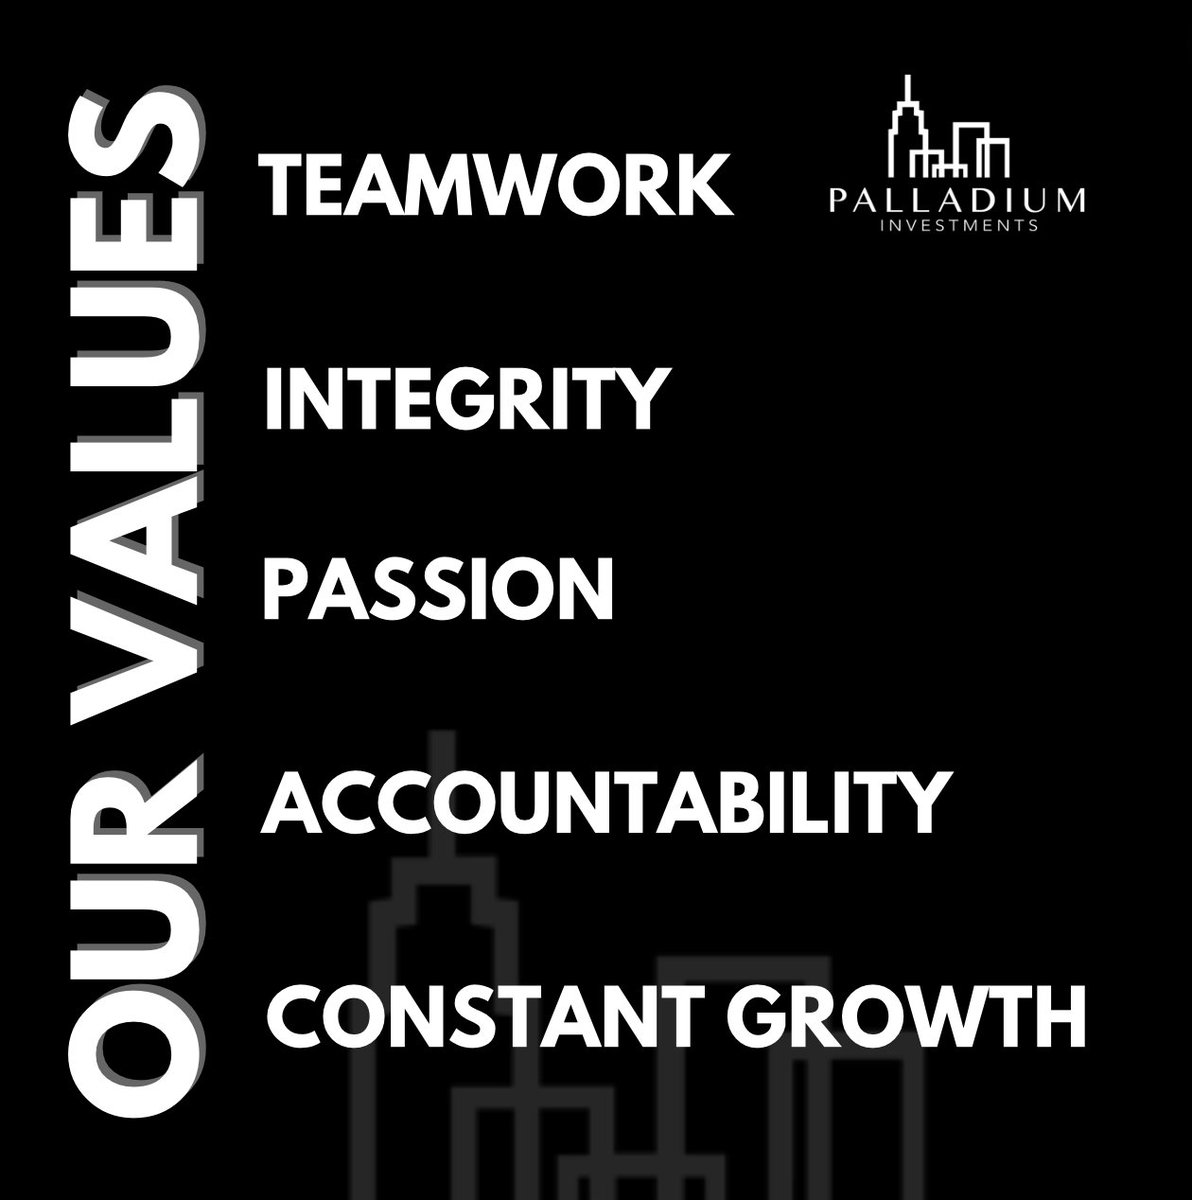 Fueling success with Our Core Values

#Teamwork #Integrity #Passion #Accountability #ConstantGrowth #CompanyValues #realestateagent #floridahousingmarket #investing101 #realinvestors #startinvesting #newinvestors #floridadeals #entrepreneur #invest #floridahomes #businessmen